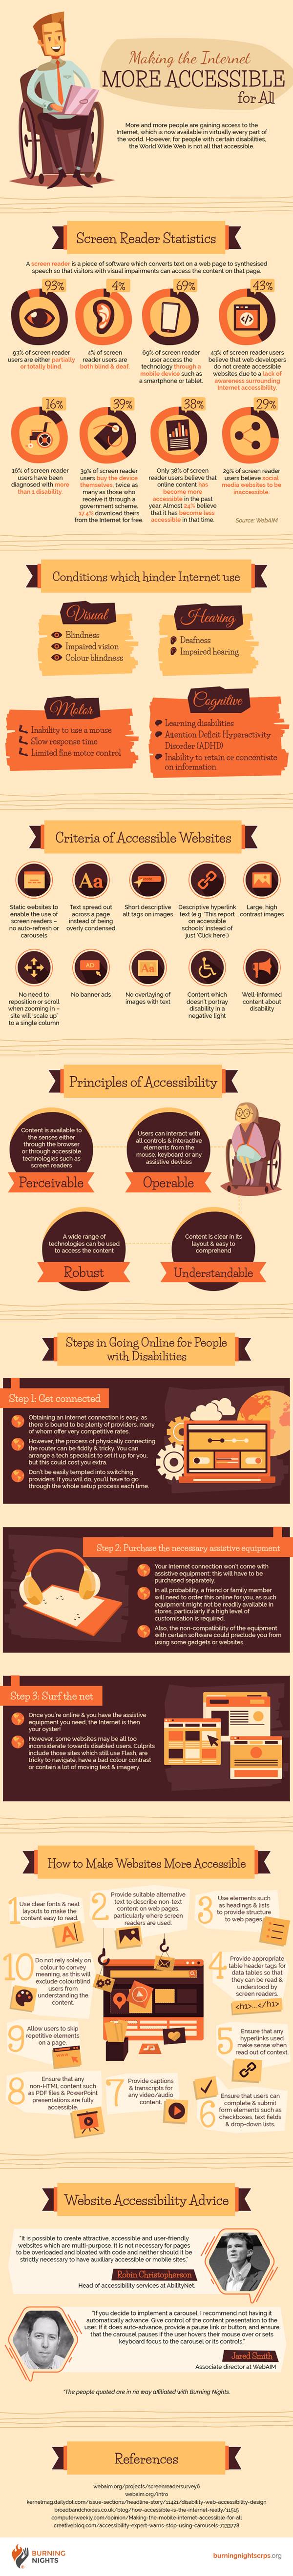 internet-for-disabilities